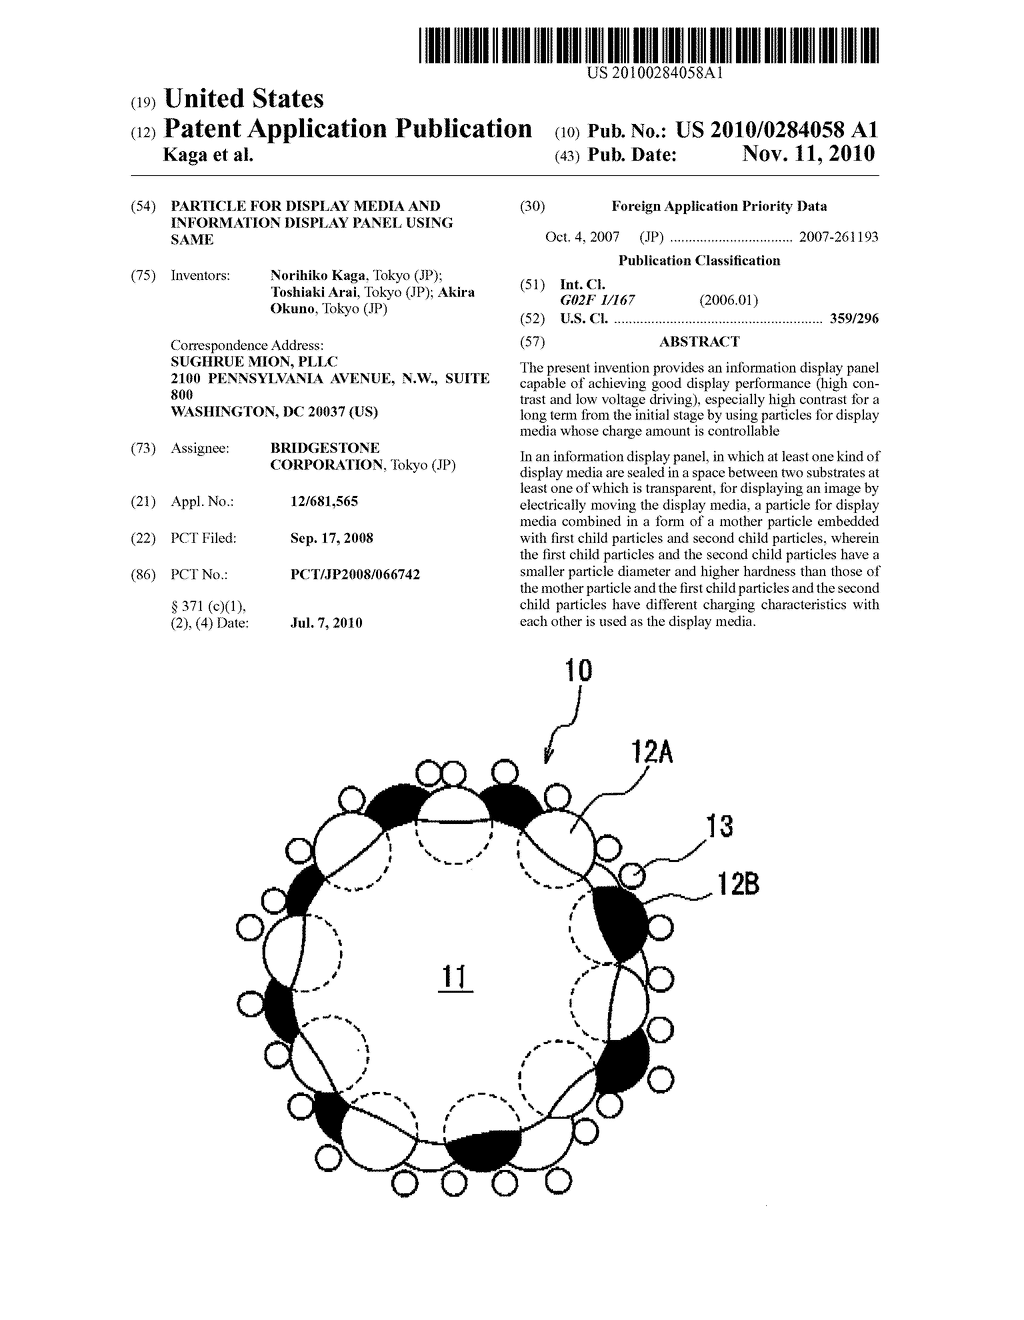 PARTICLE FOR DISPLAY MEDIA AND INFORMATION DISPLAY PANEL USING SAME - diagram, schematic, and image 01